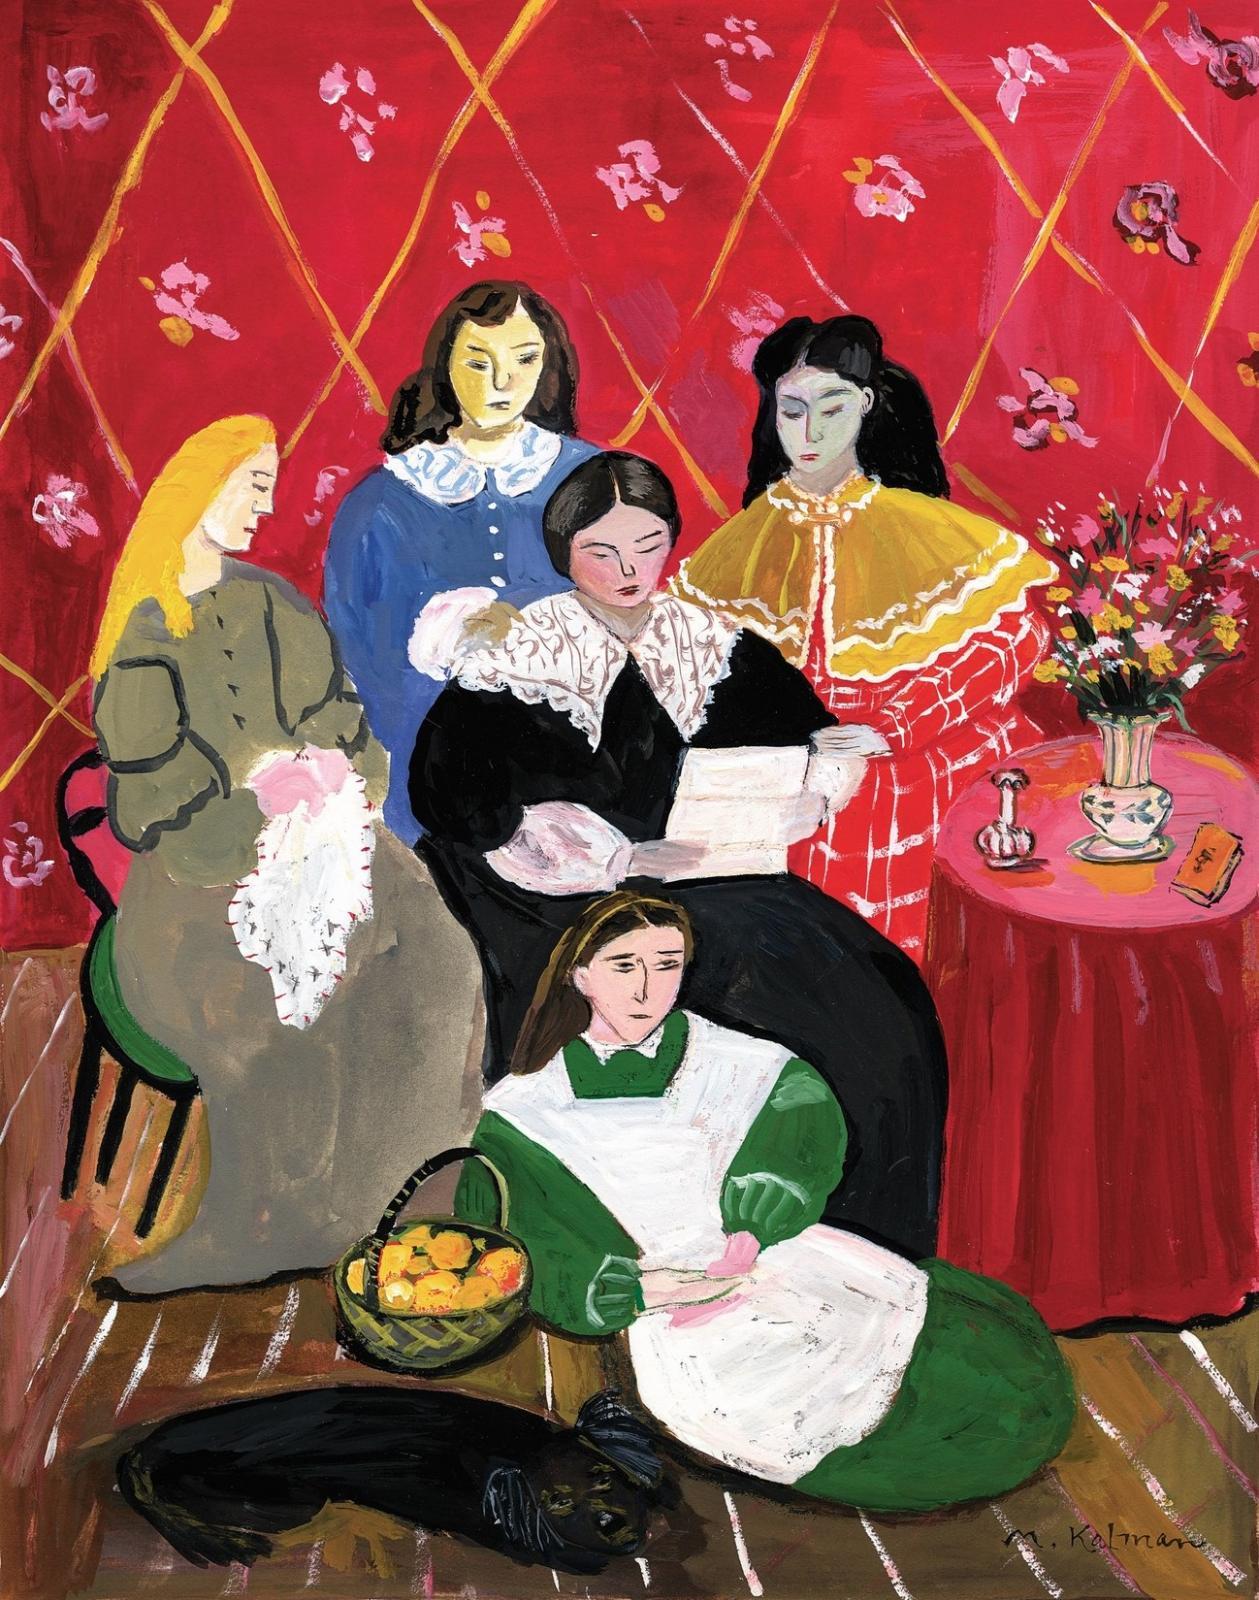 Illustration of the main characters from the novel Little Women